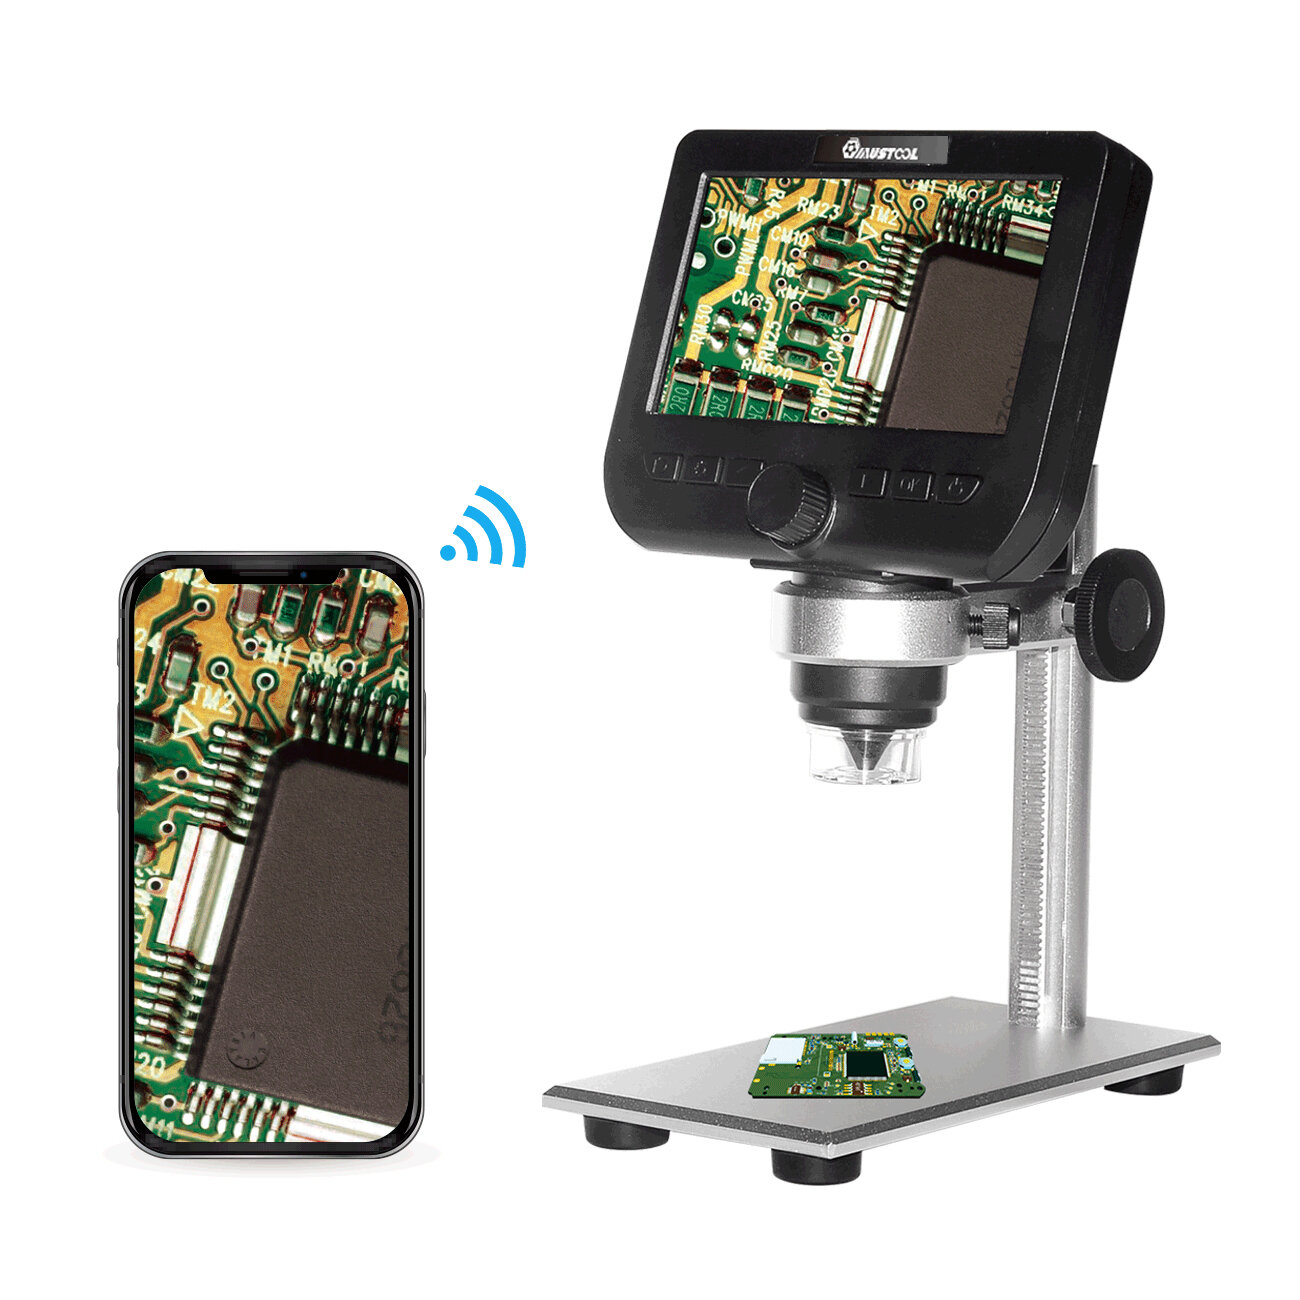 best price,mustool,g610,wifi,2mp,4.3inch,microscope,discount